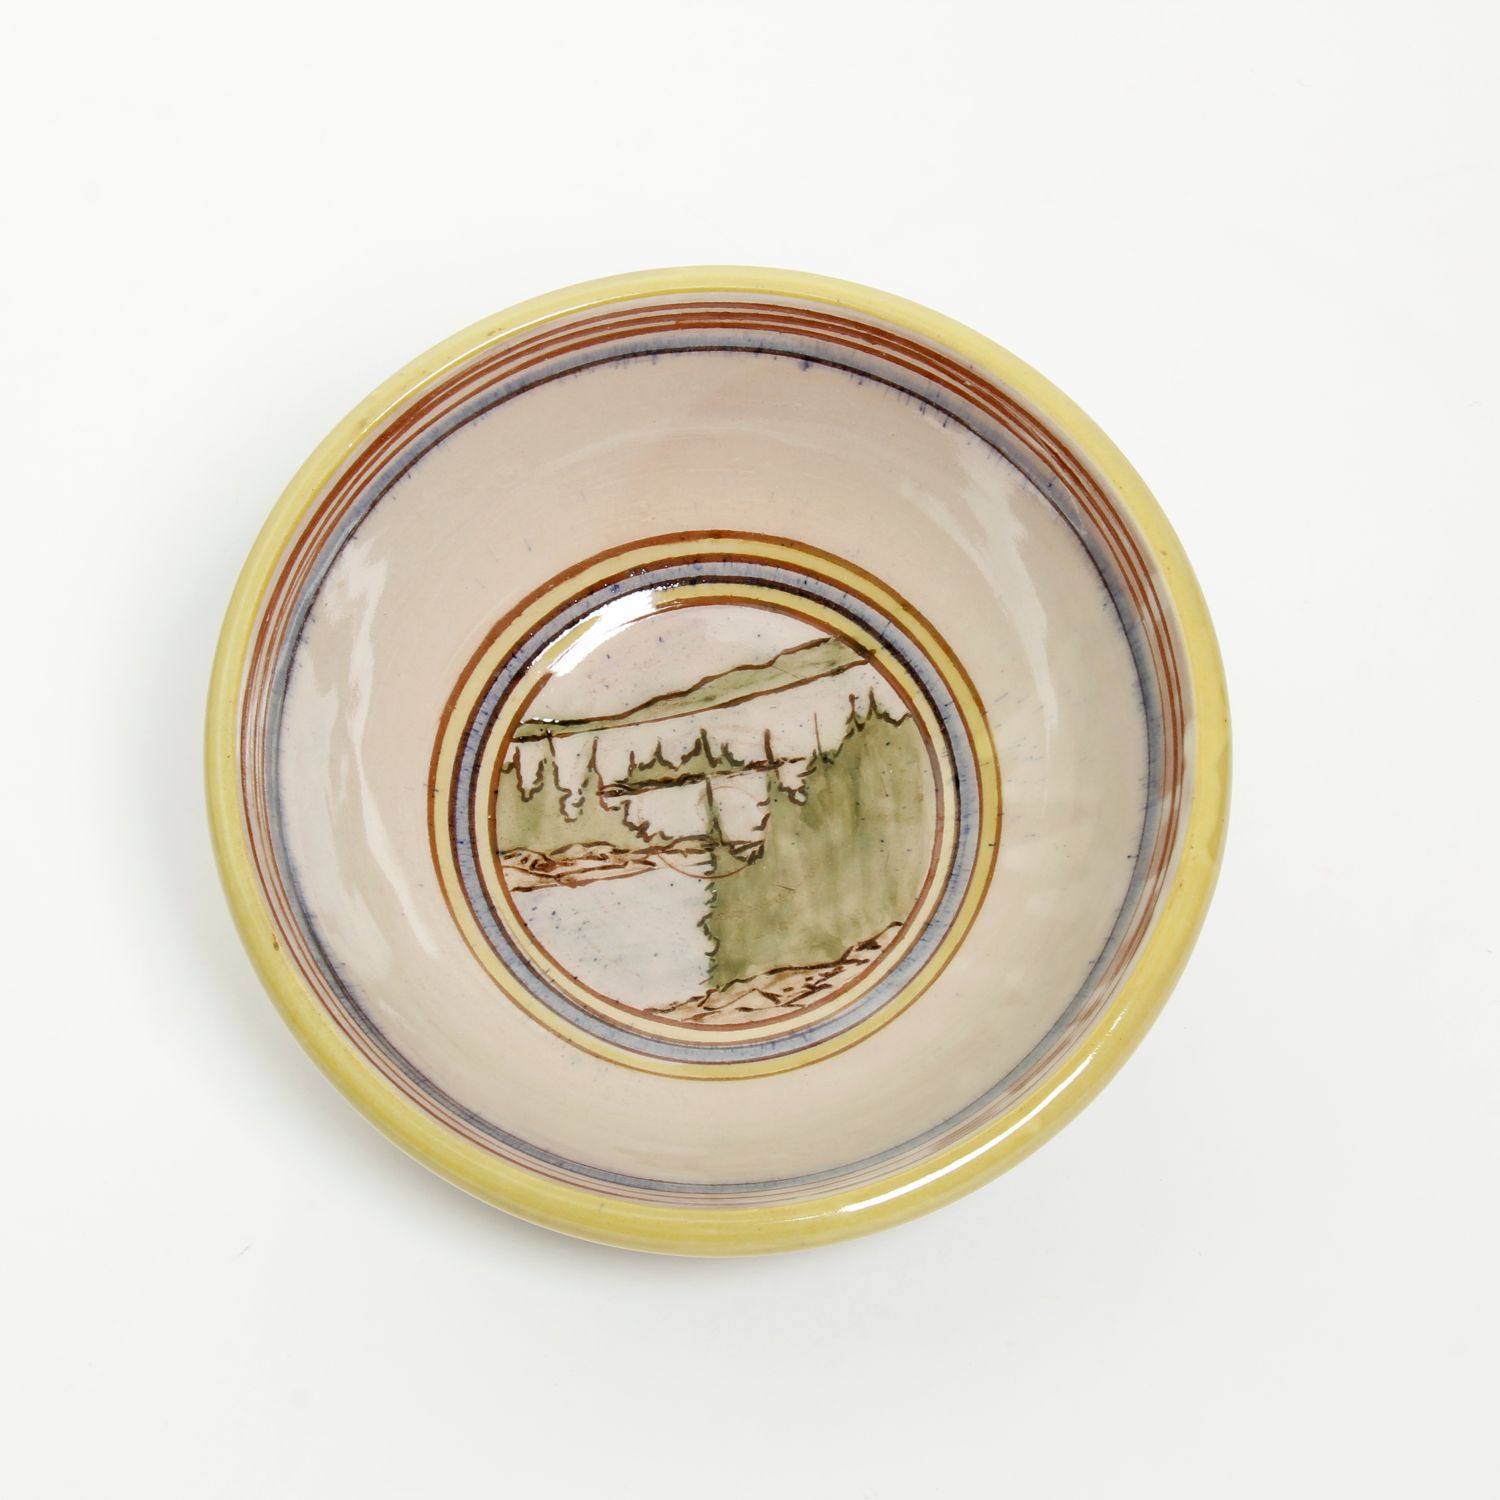 Sean Robinson: Painted Bowl in Green Product Image 1 of 3